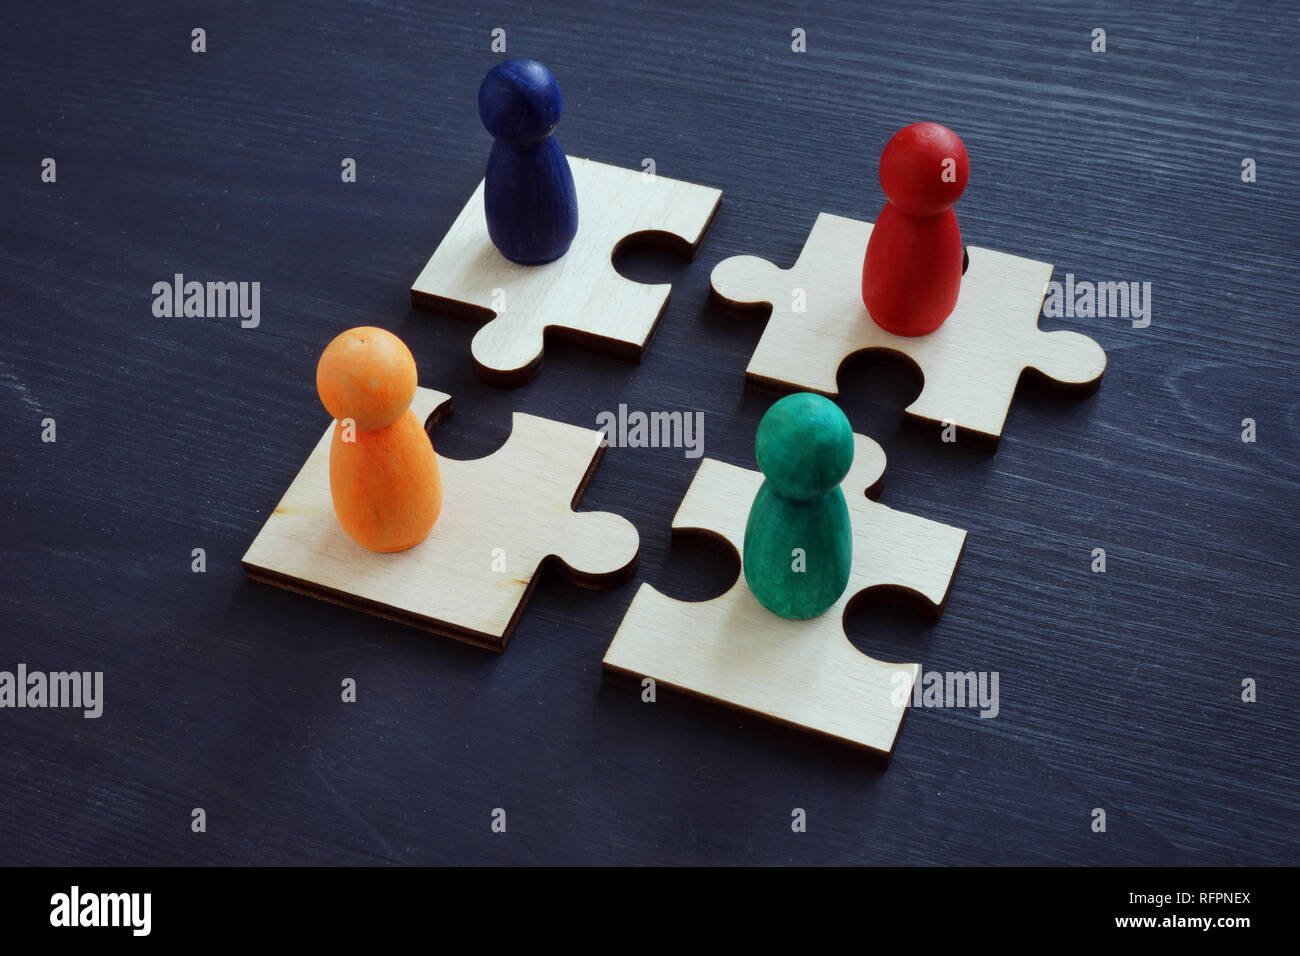 Employee relations and teamwork concept. Pieces of puzzles. Stock Photo